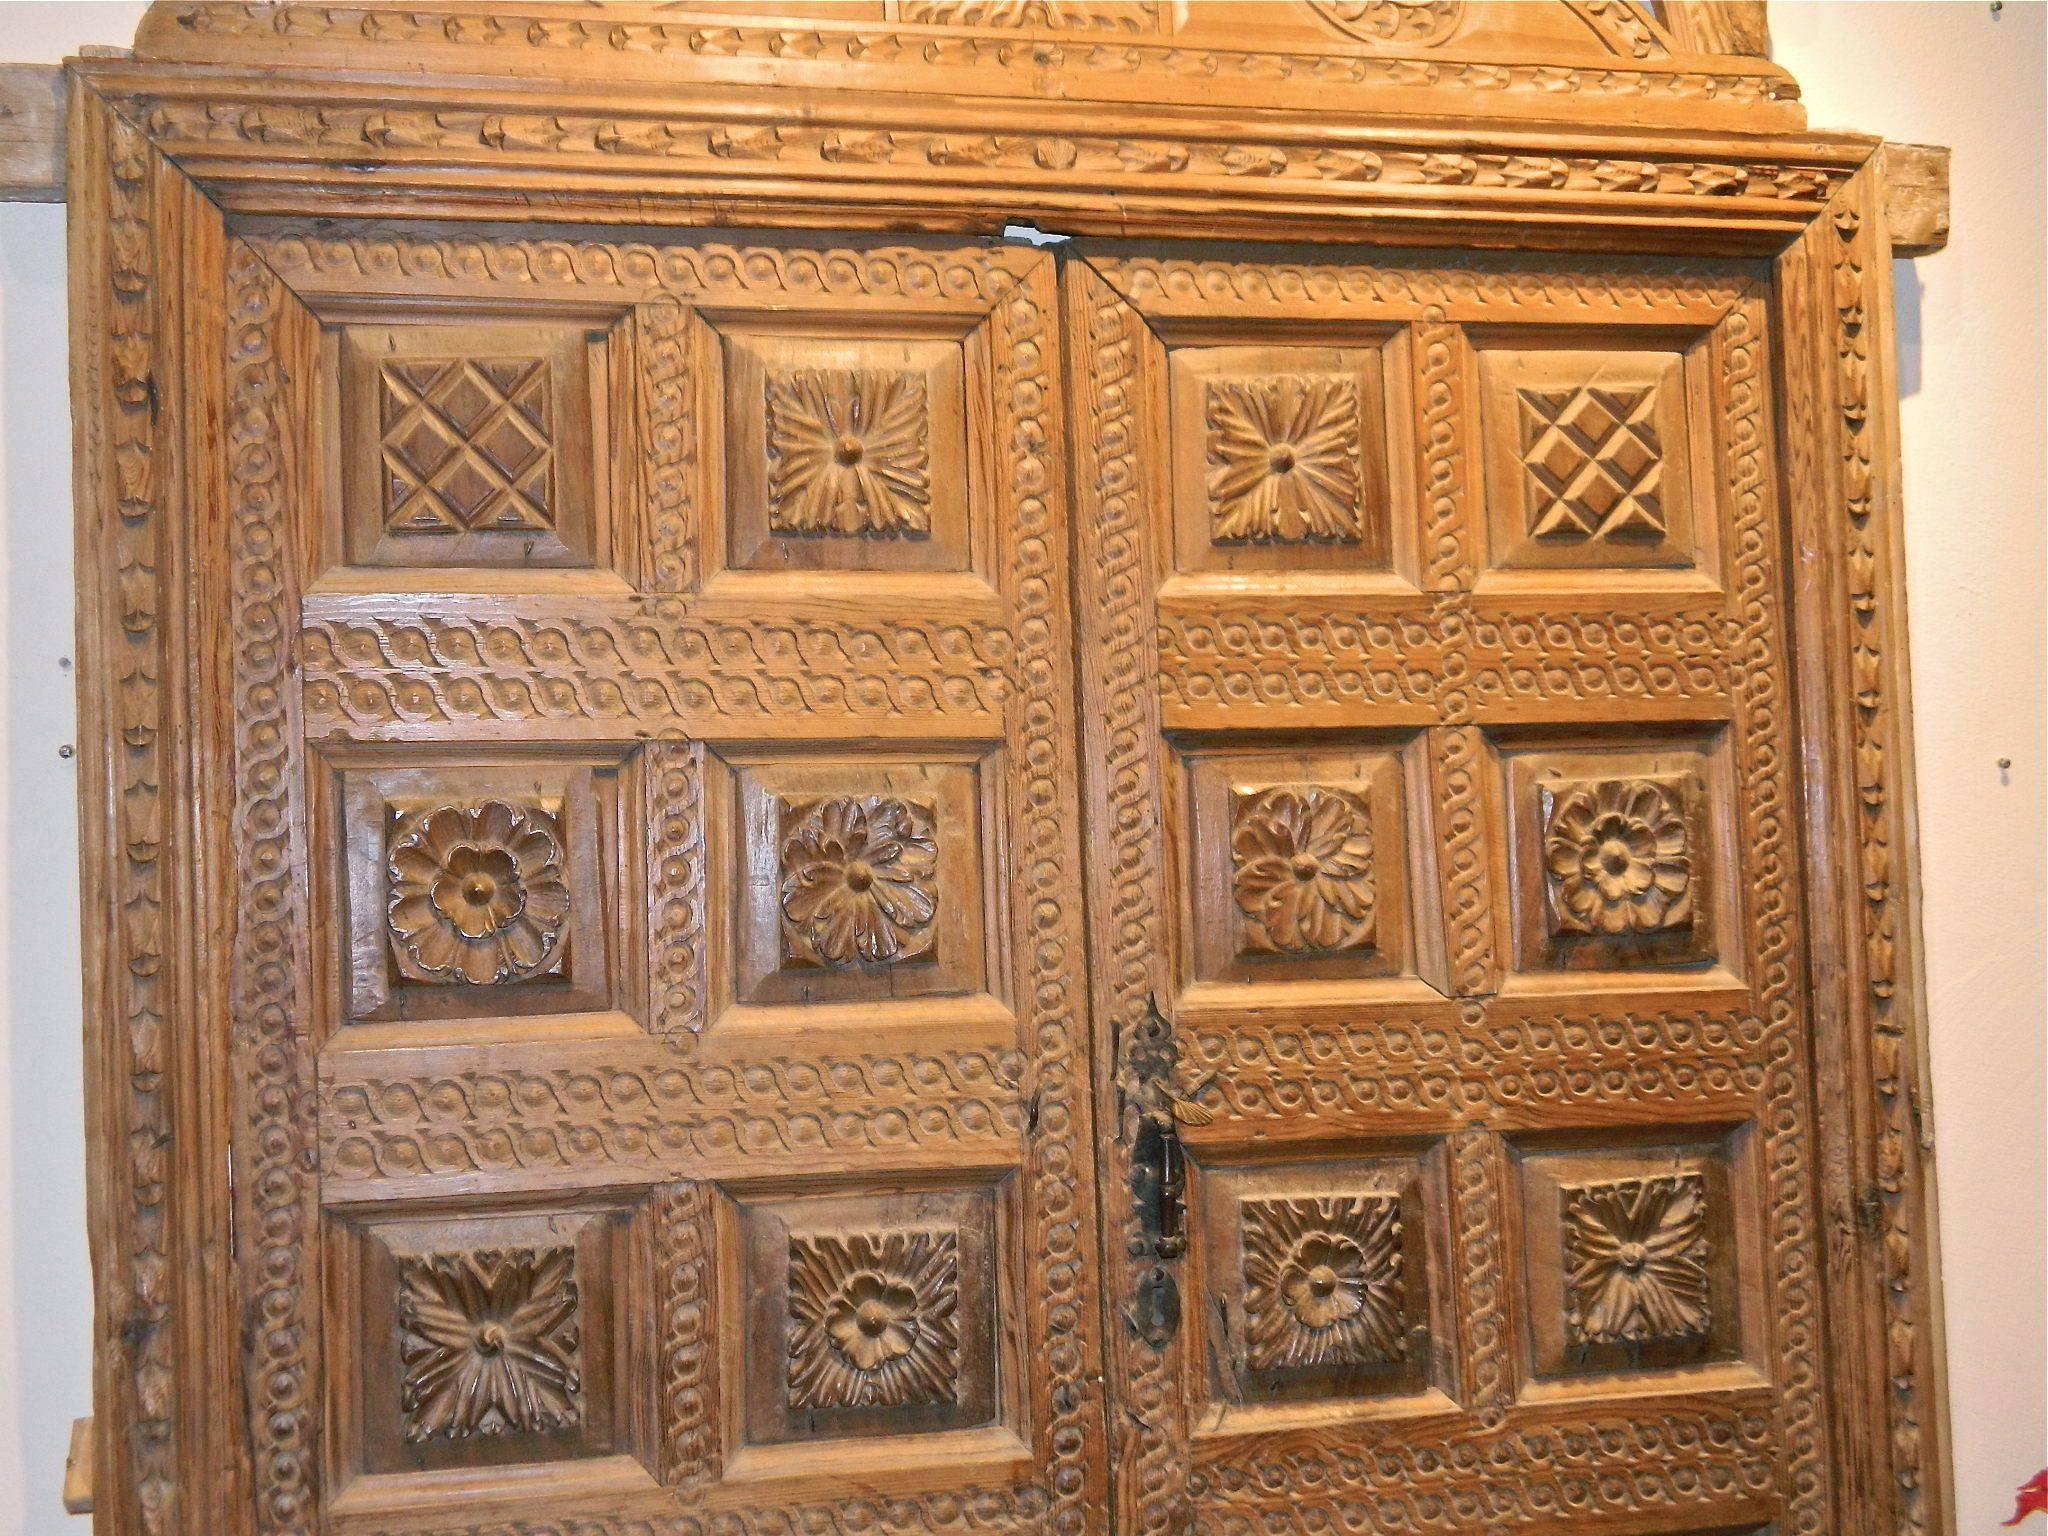 Renaissance Mid-Late 16th Century Framed Pyrenees Sacristy Door with Crown, Pine and Walnut For Sale